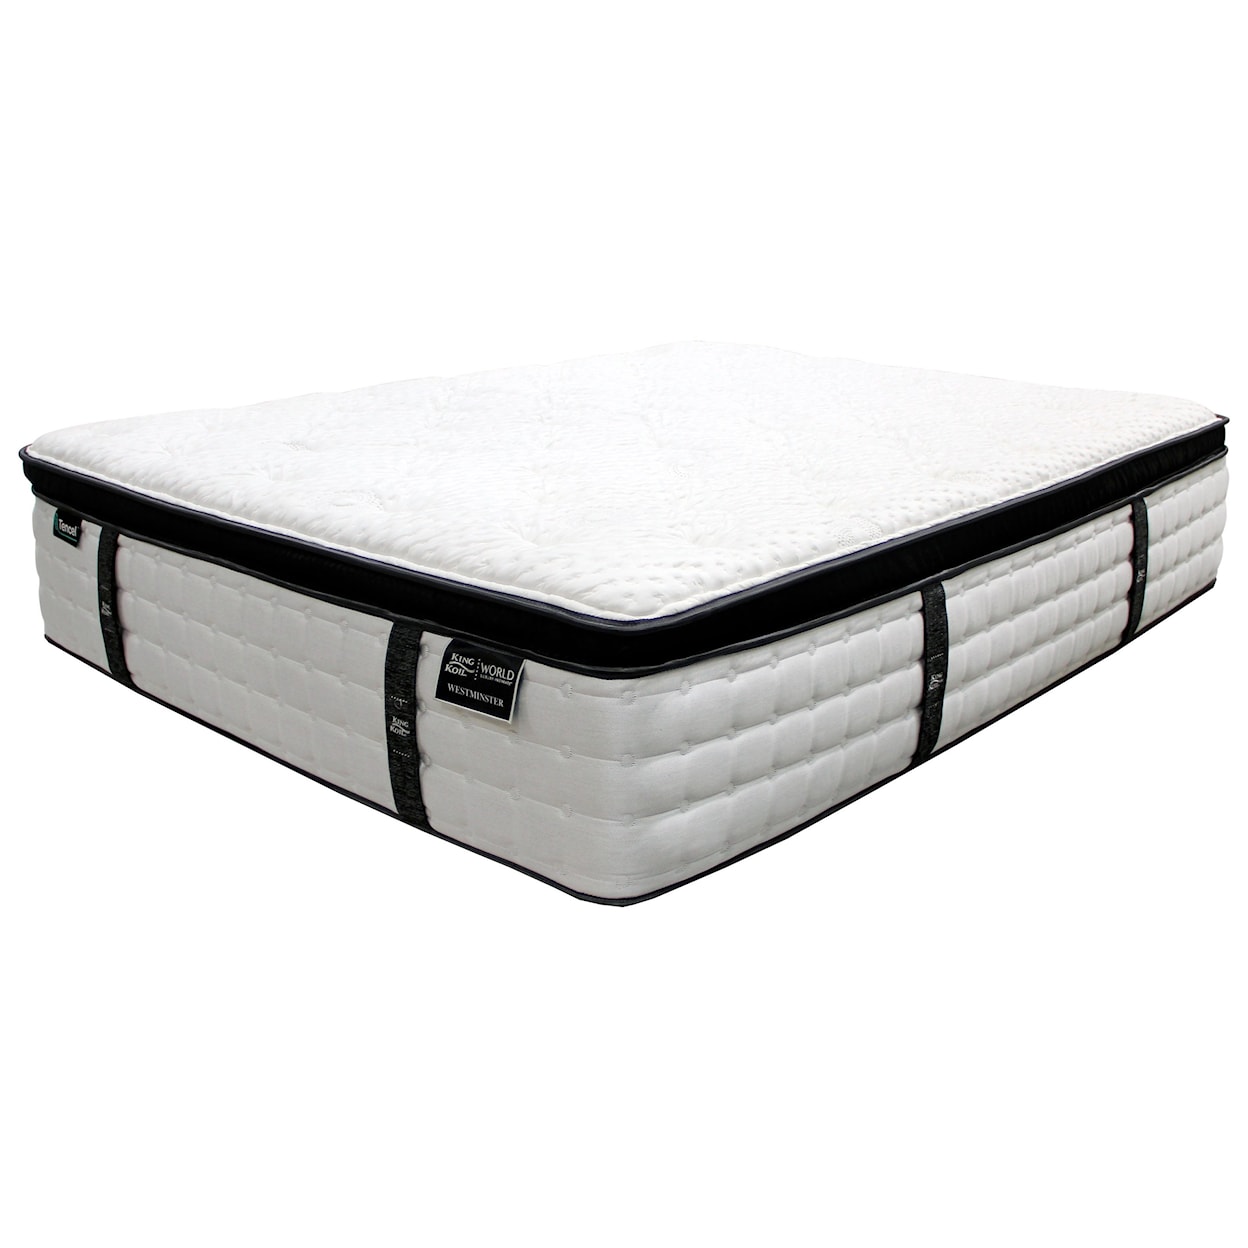 King Koil Westminster CET Queen Pocketed Coil Mattress